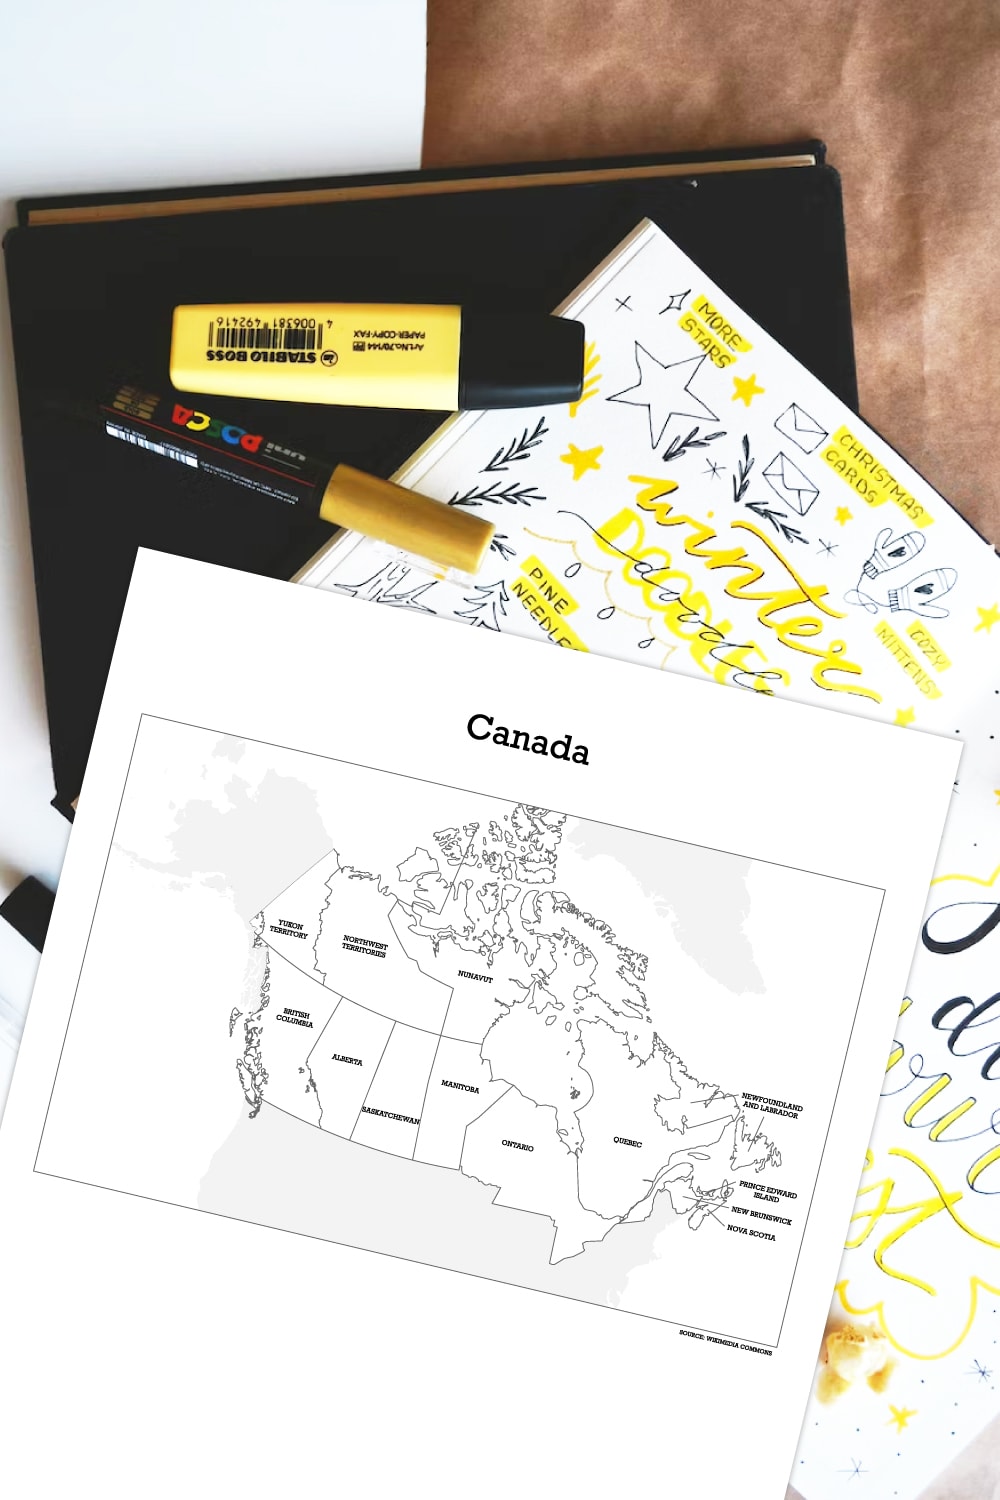 Preview of Canadian printable map on top of white desk with black notebook, kraft papers, highlighters, markers and open bullet journal underneath.  